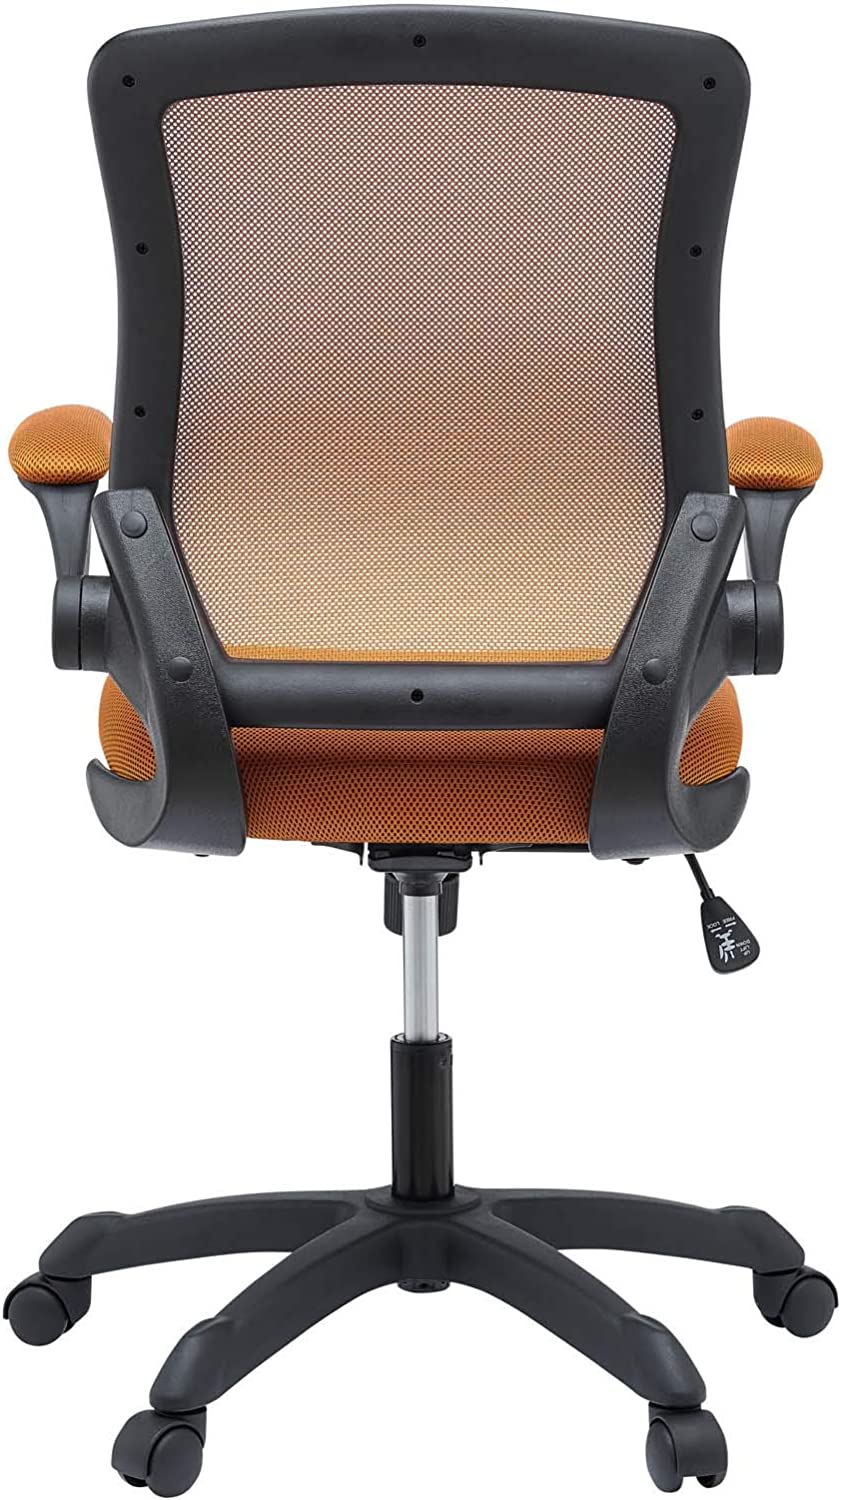 Modway Veer Office Chair with Mesh Back and Vinyl Seat With Flip-Up Arms in Tan